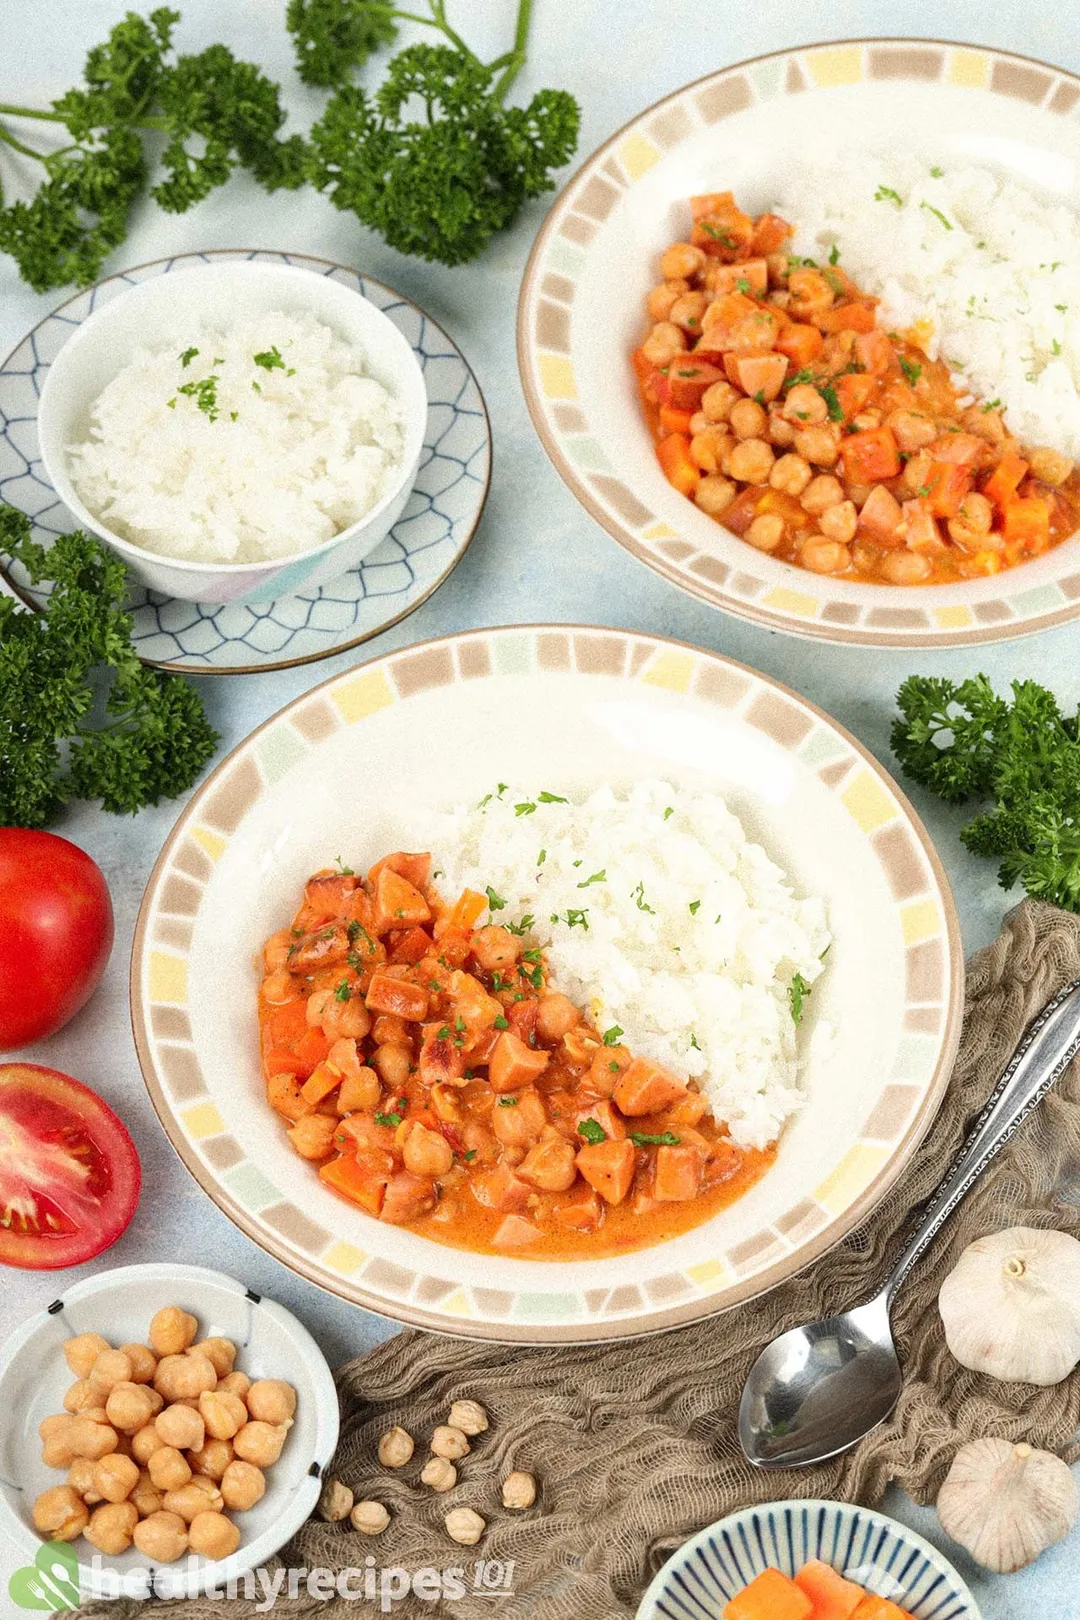 Plates of chickpea stew and cooked white rice surrounded by a small disk of chickpeas, a small bowl of cooked white rice, fresh parsley, and tomatoes.